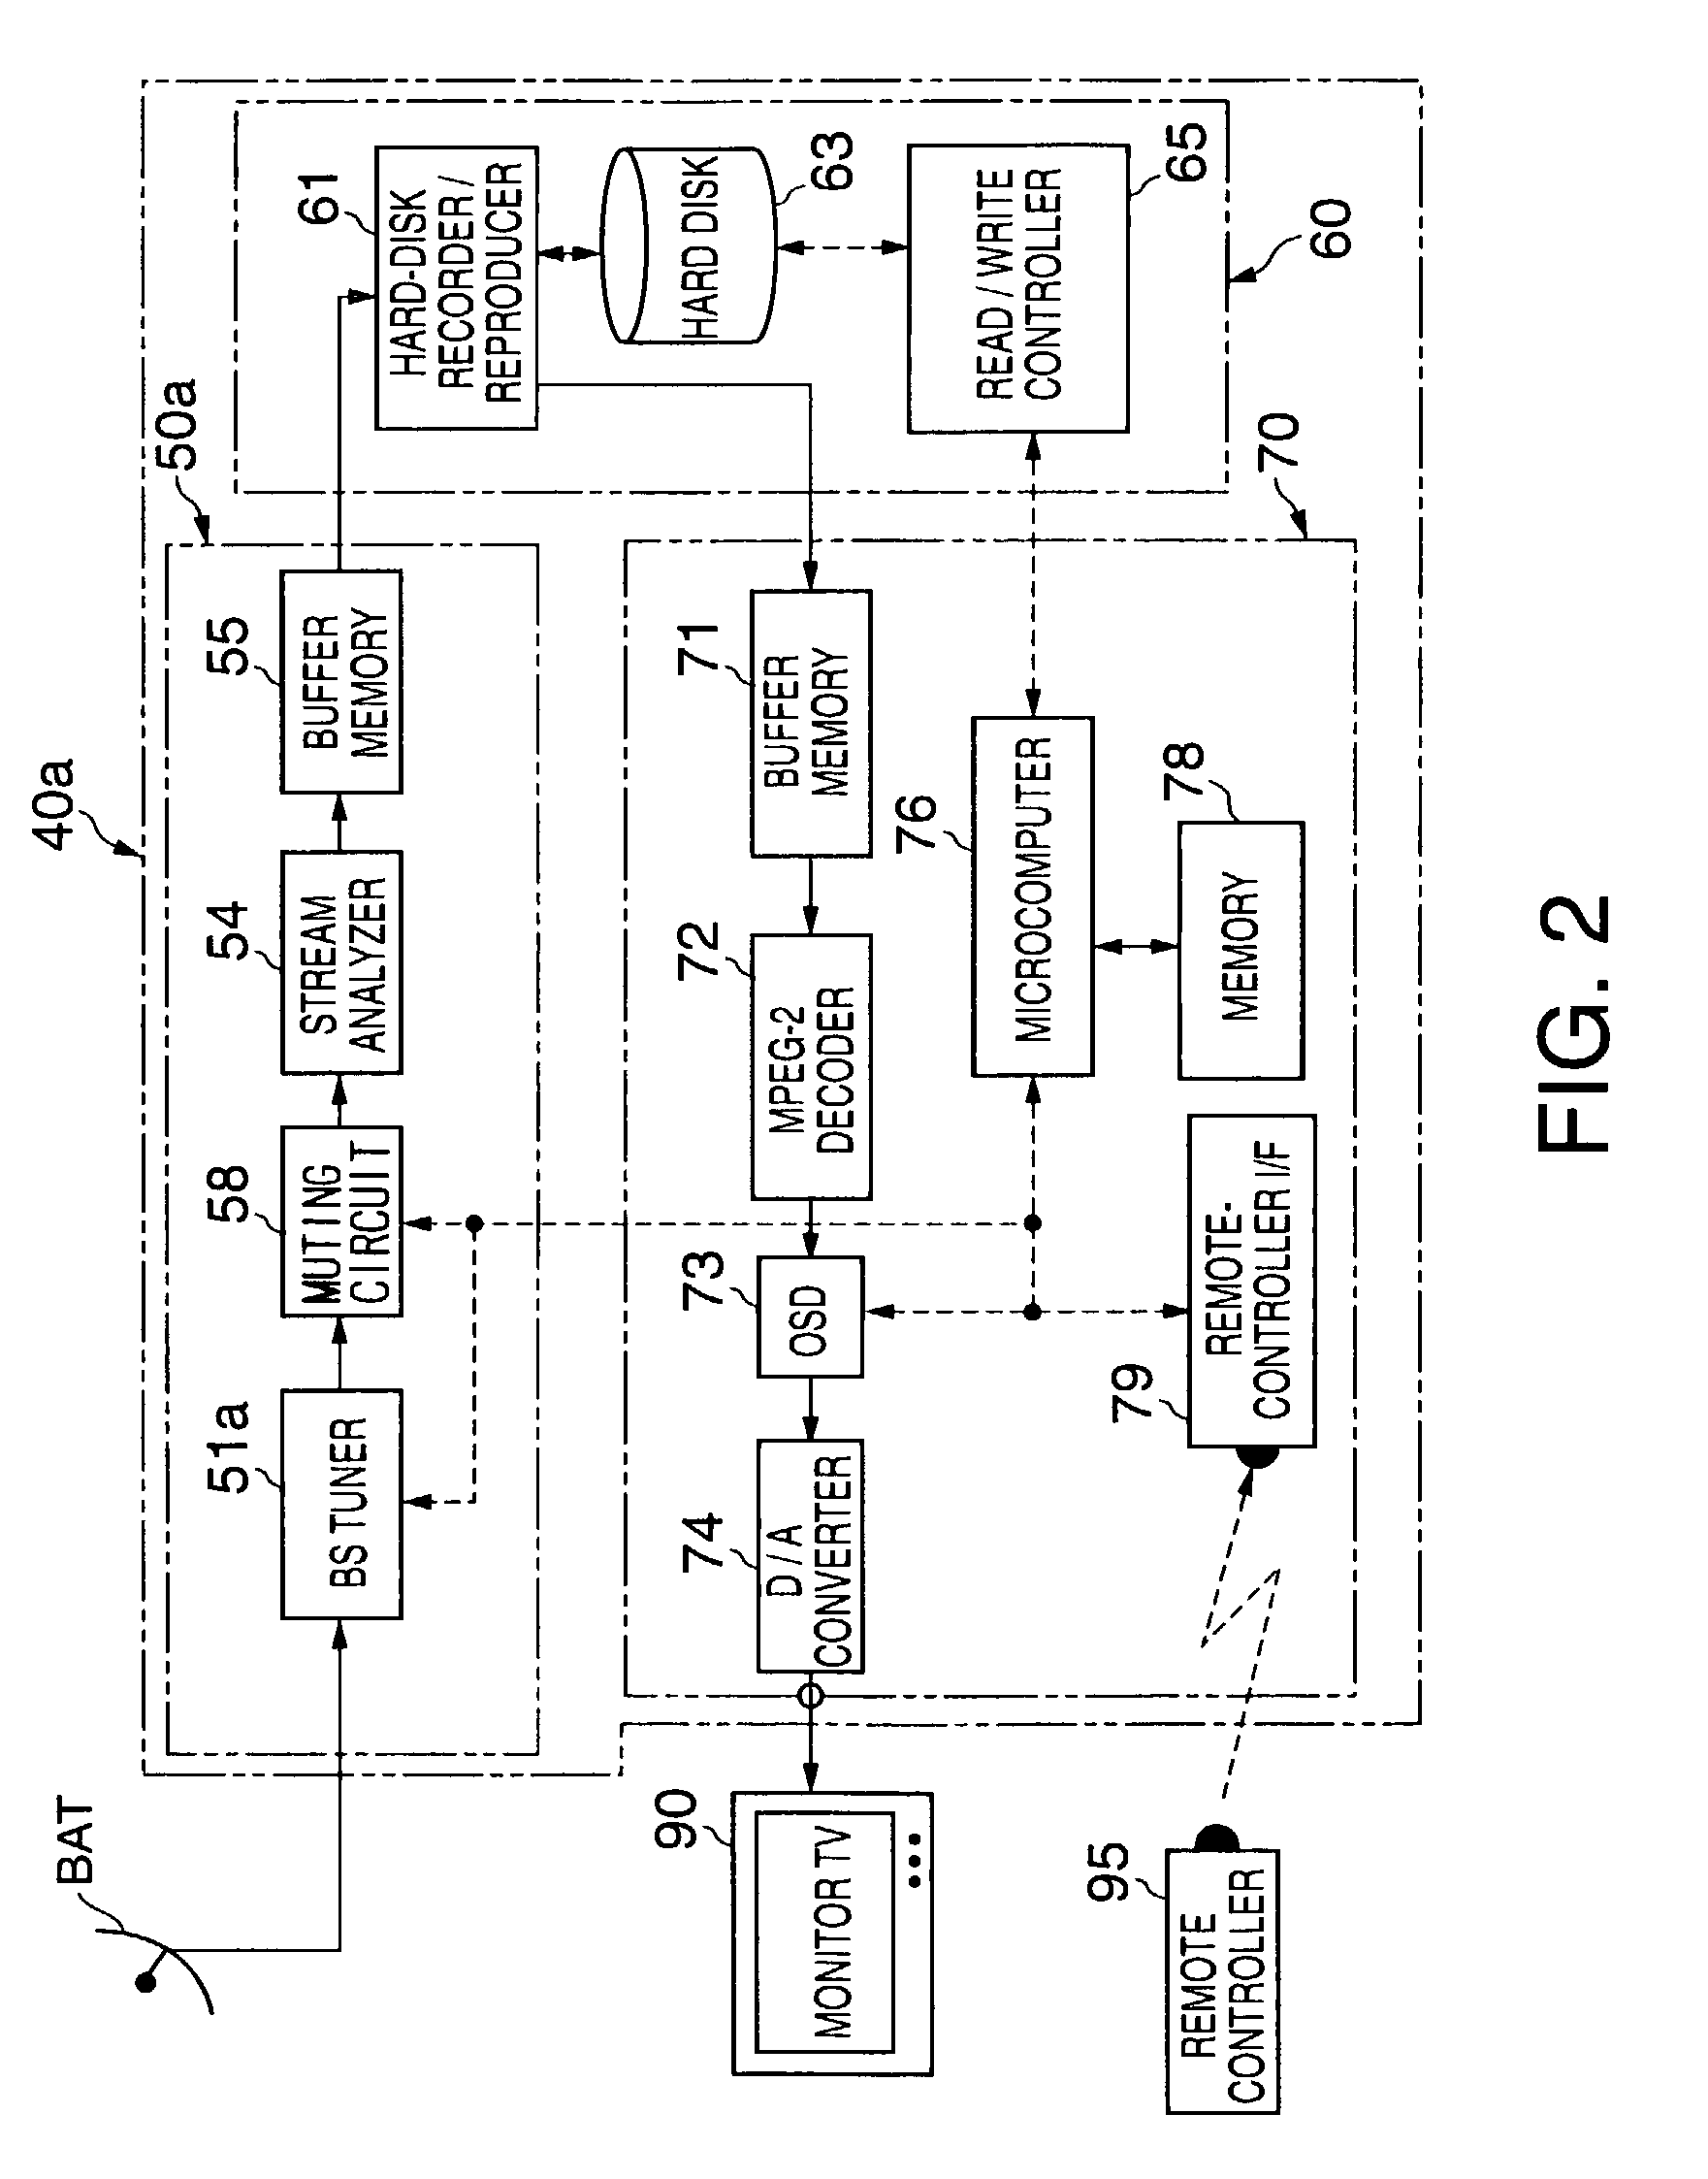 Apparatus and method for reproducing video signals as they are recorded